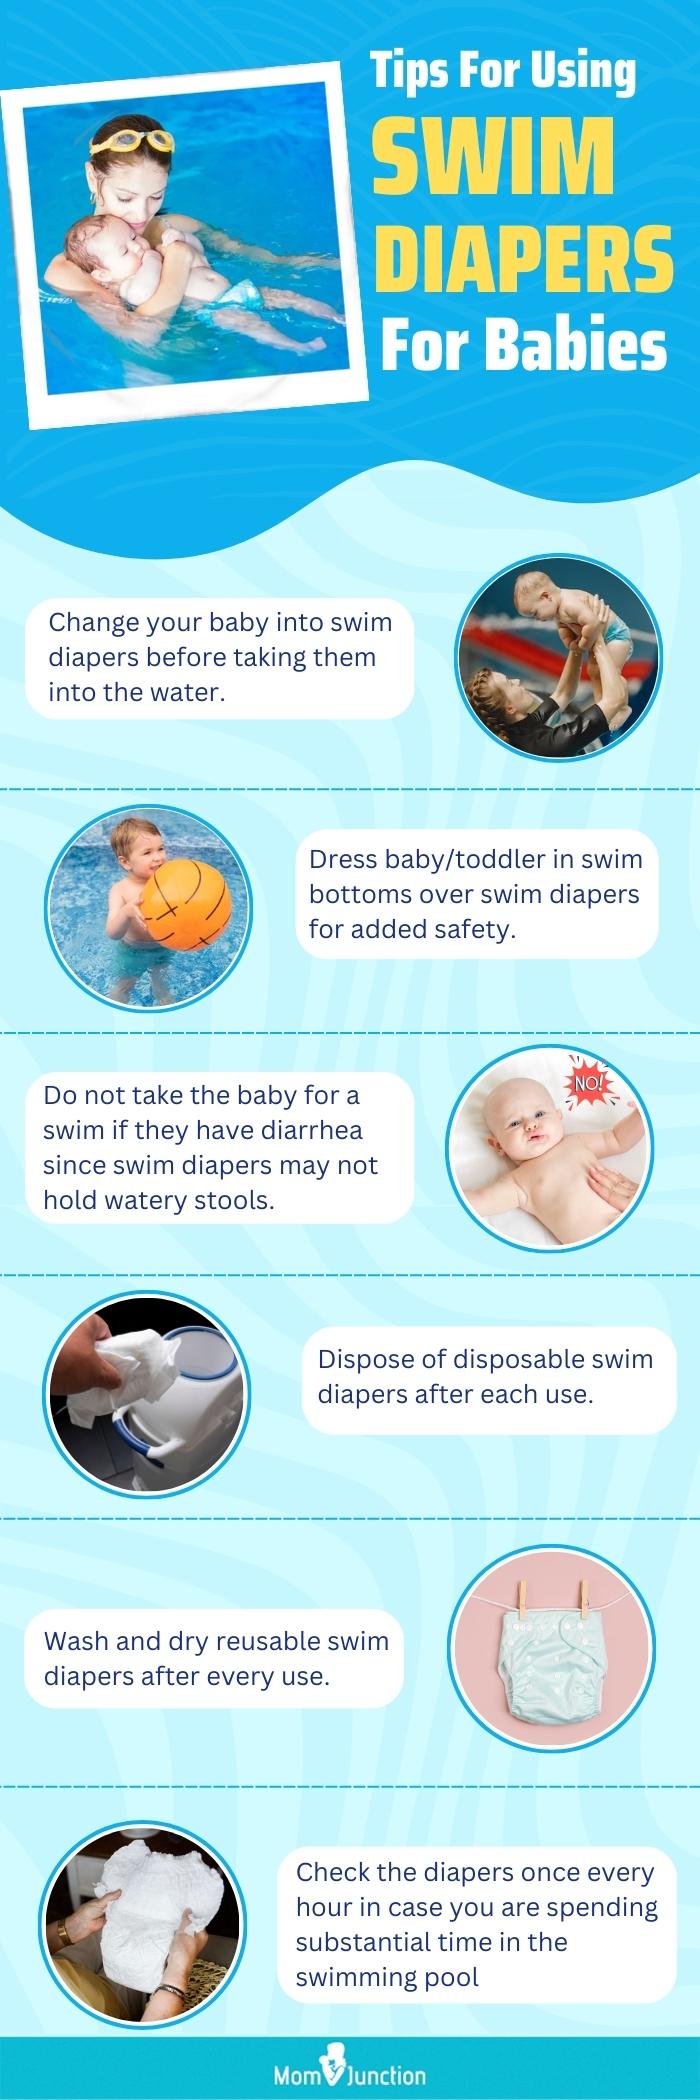 Tips For Using Swim Diapers For Babies Row (infographic)